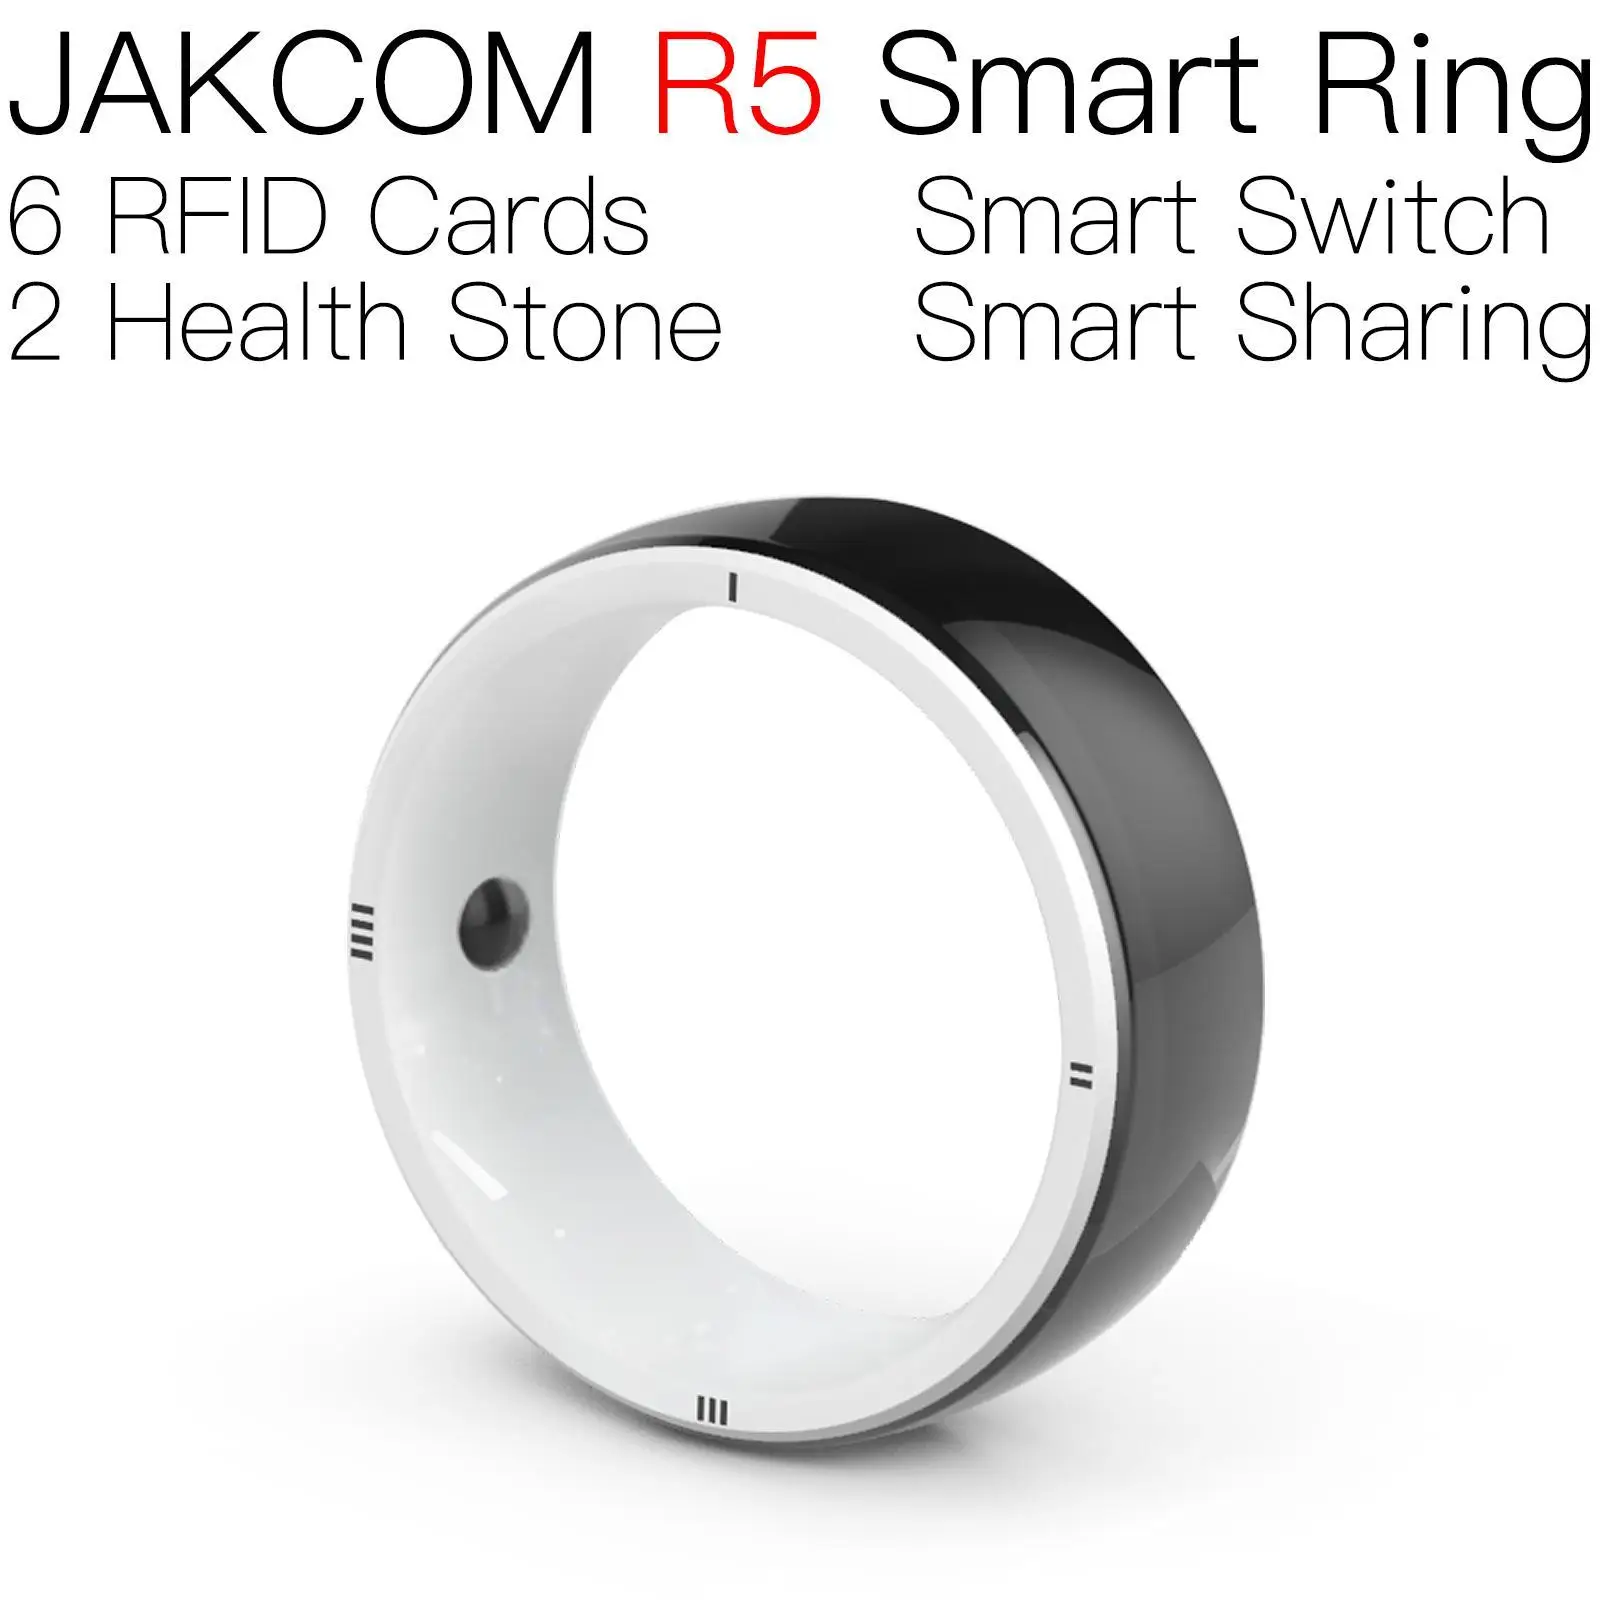 

JAKCOM R5 Smart Ring better than nfc tags programmable relay lm339 ne555 new users deal with free shipping t5577 rewritable